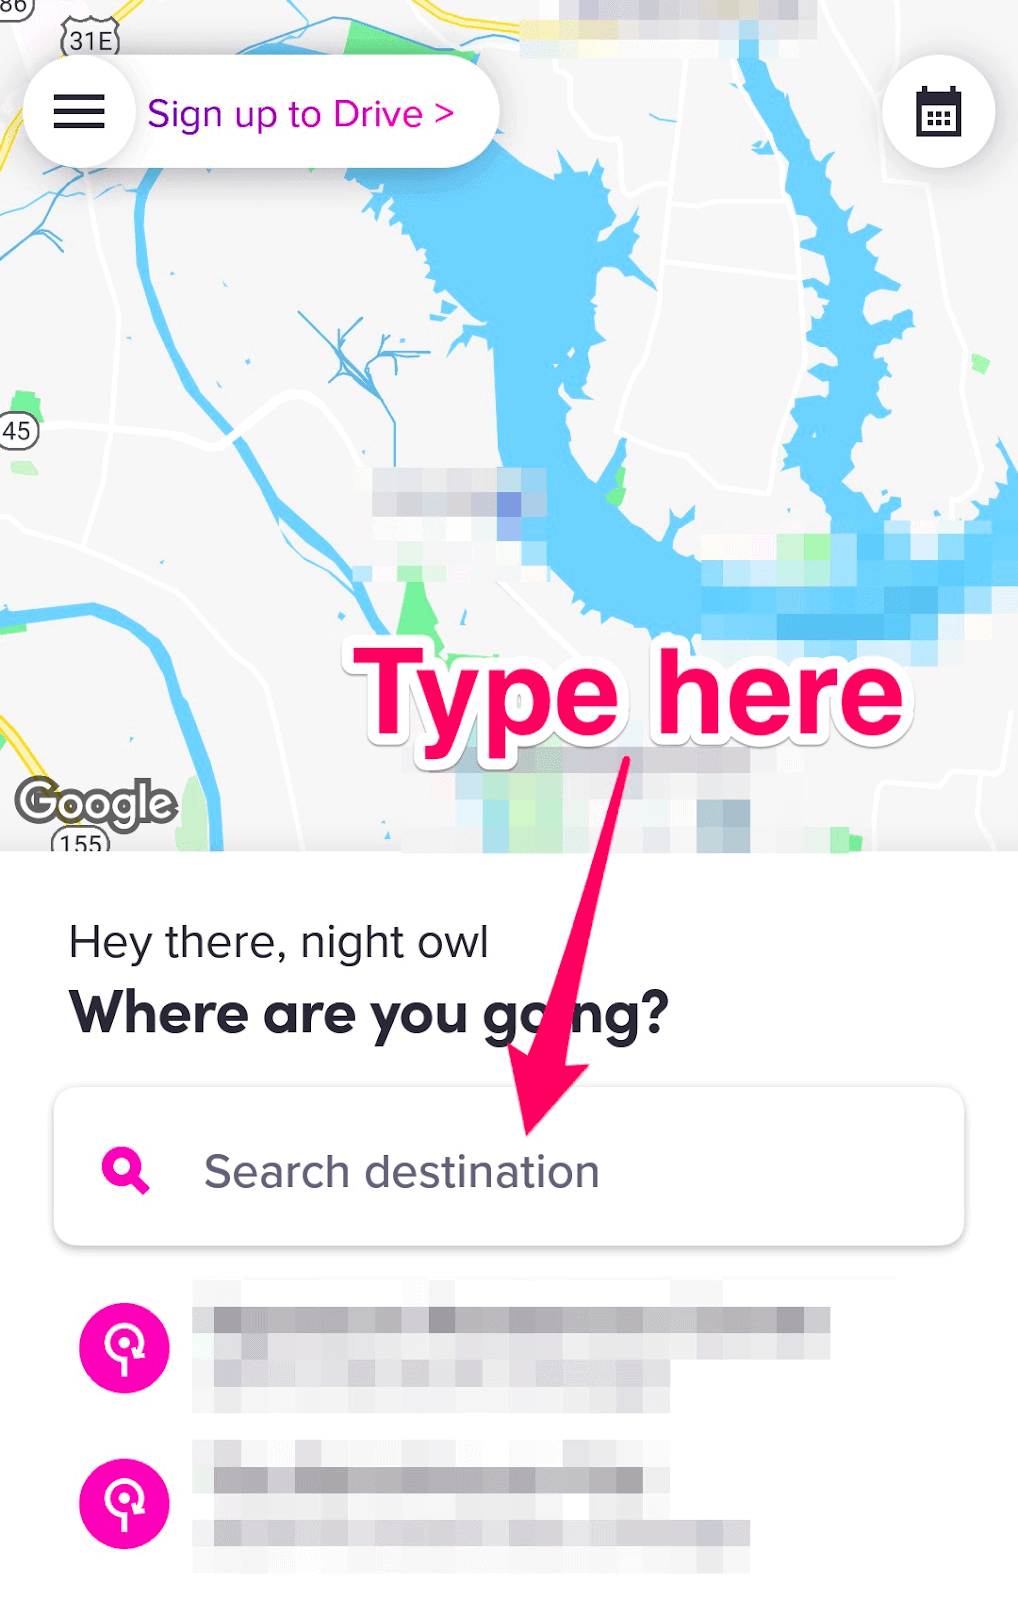 How to Schedule a Lyft Ride - Search destination